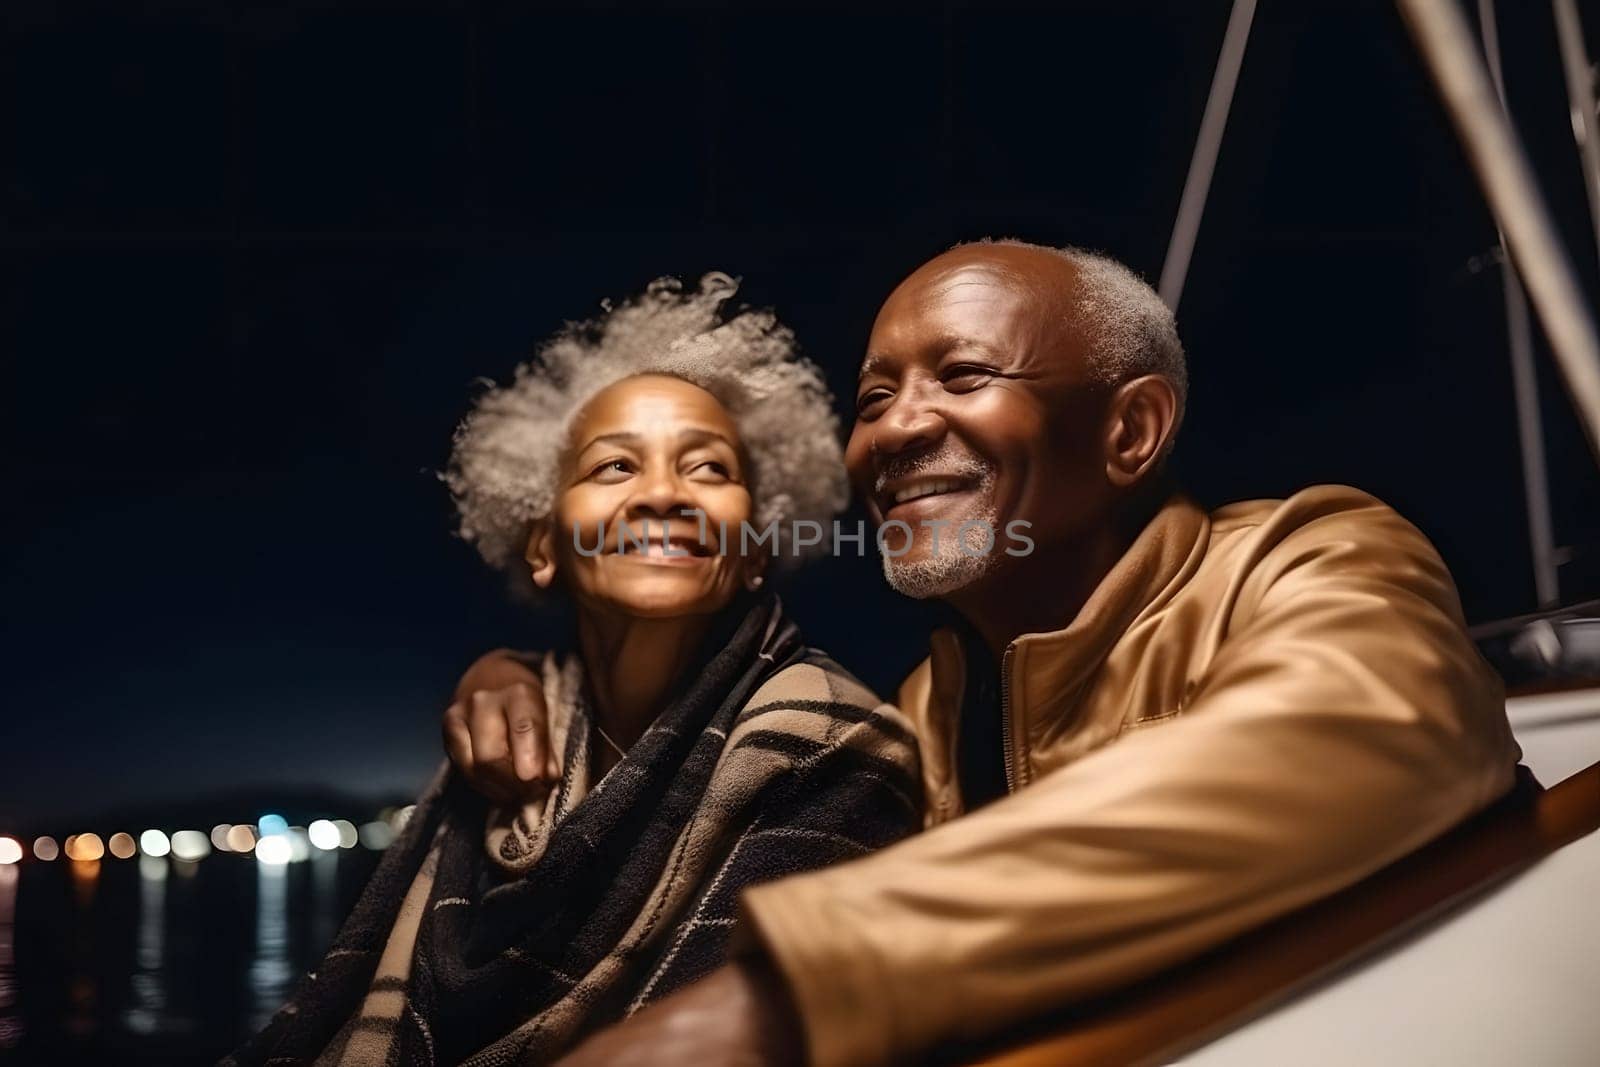 Beautiful and happy senior african american couple on a sailboat at night, neural network generated image by z1b